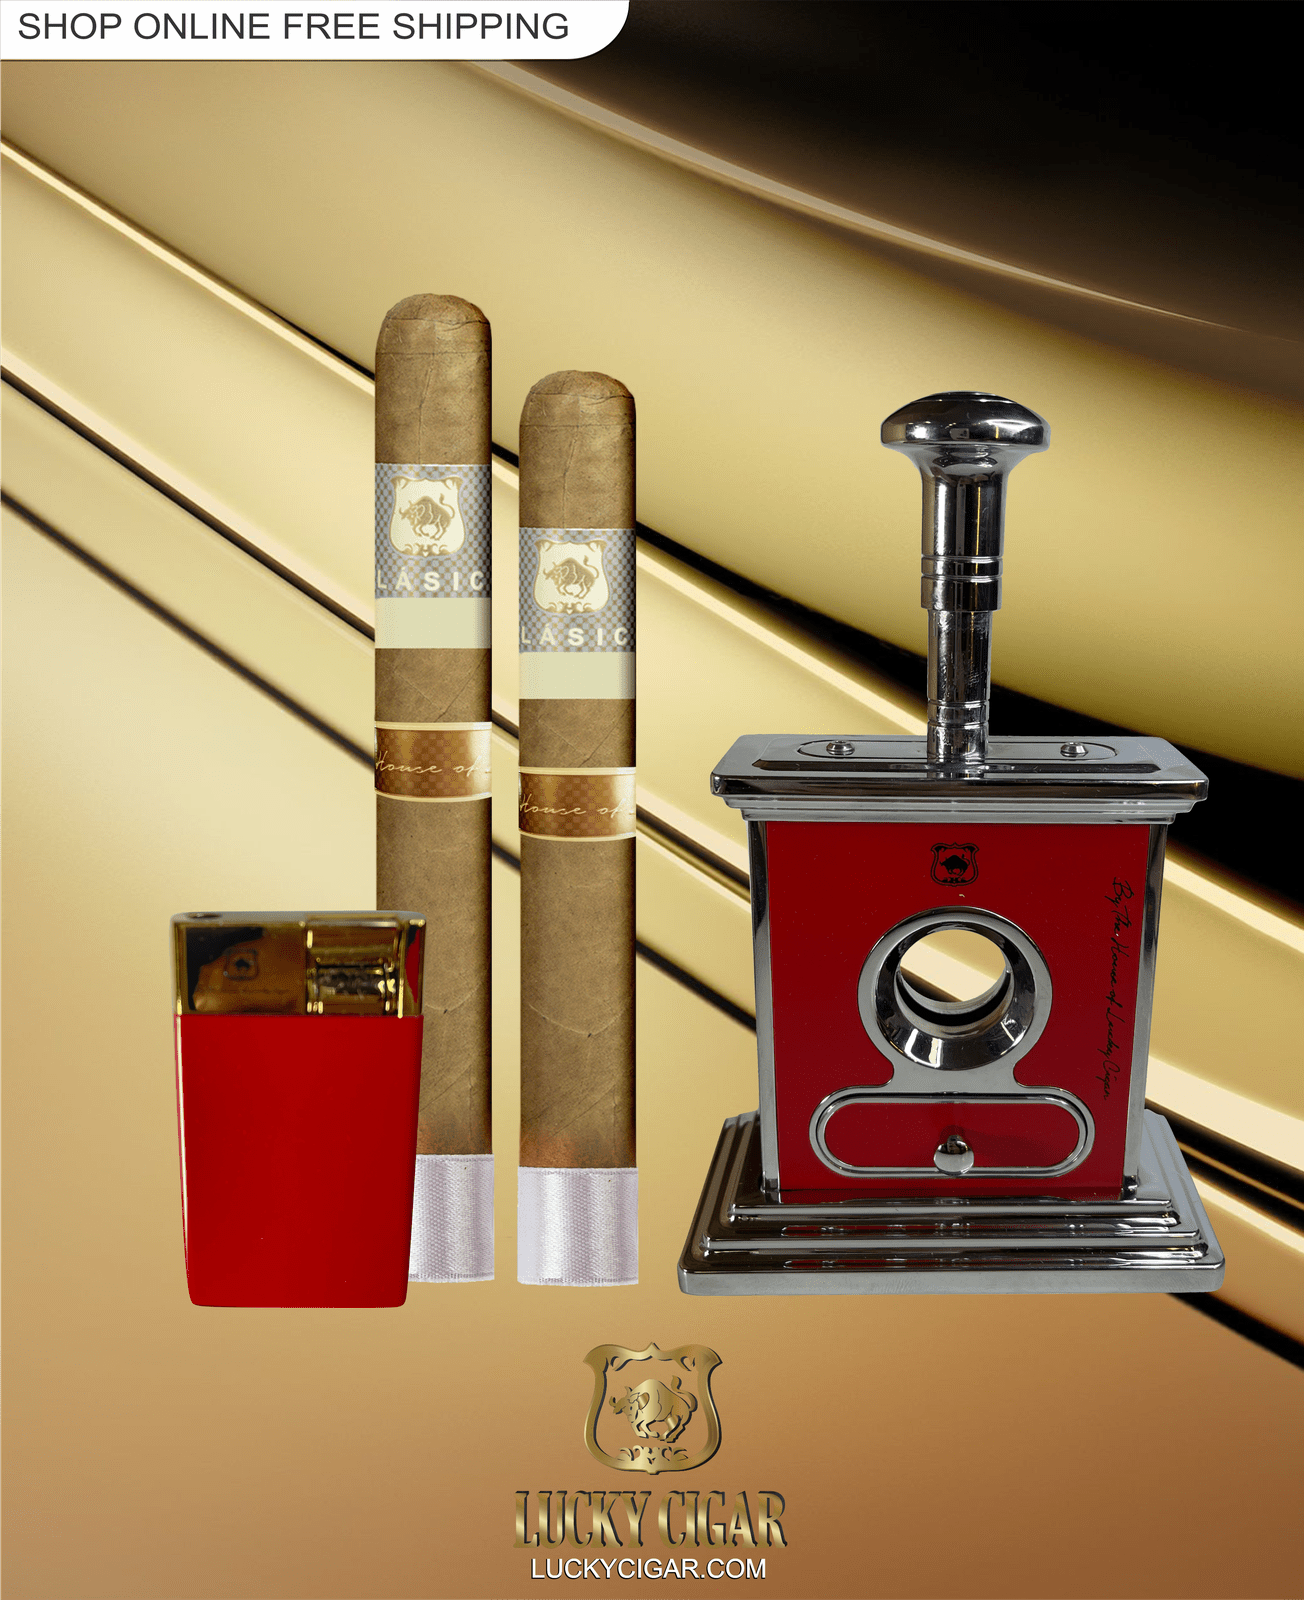 Lucky Cigar Sampler Sets: Set of 2 Classico Toro, Robusto Cigars with Torch, Table Cutter